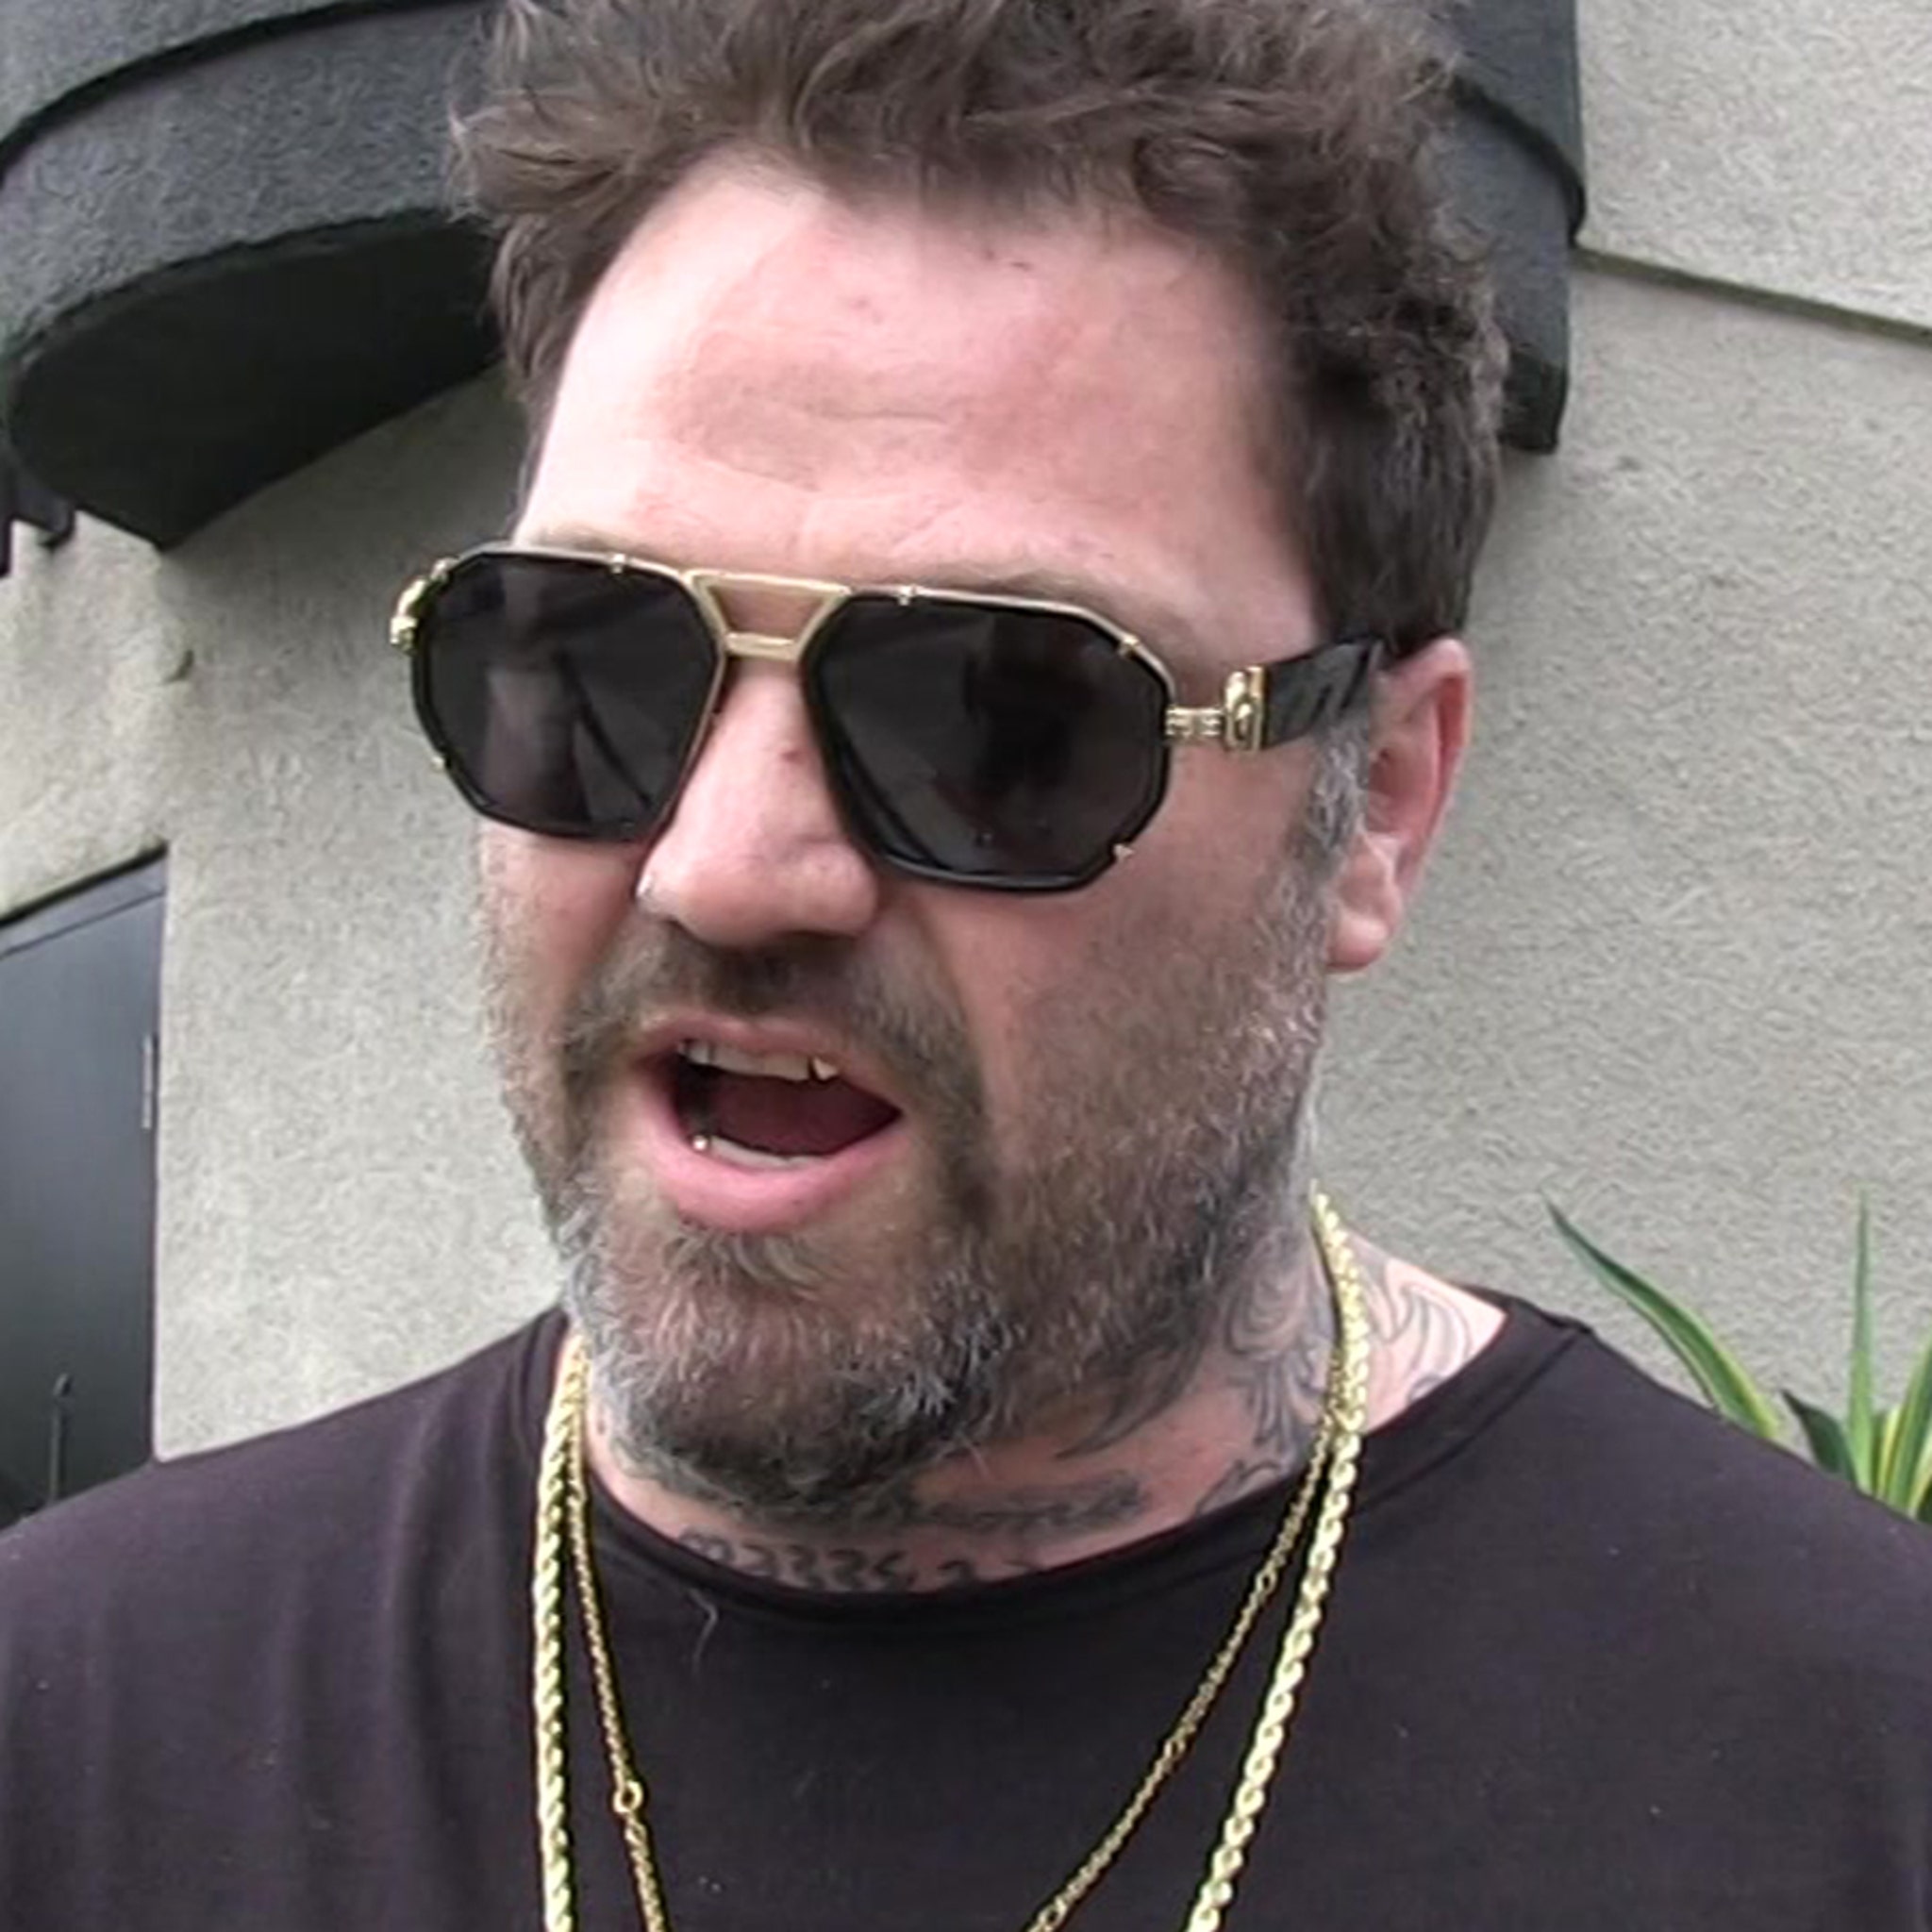 Jackass Star Bam Margera Arrested for Public Intoxication photo